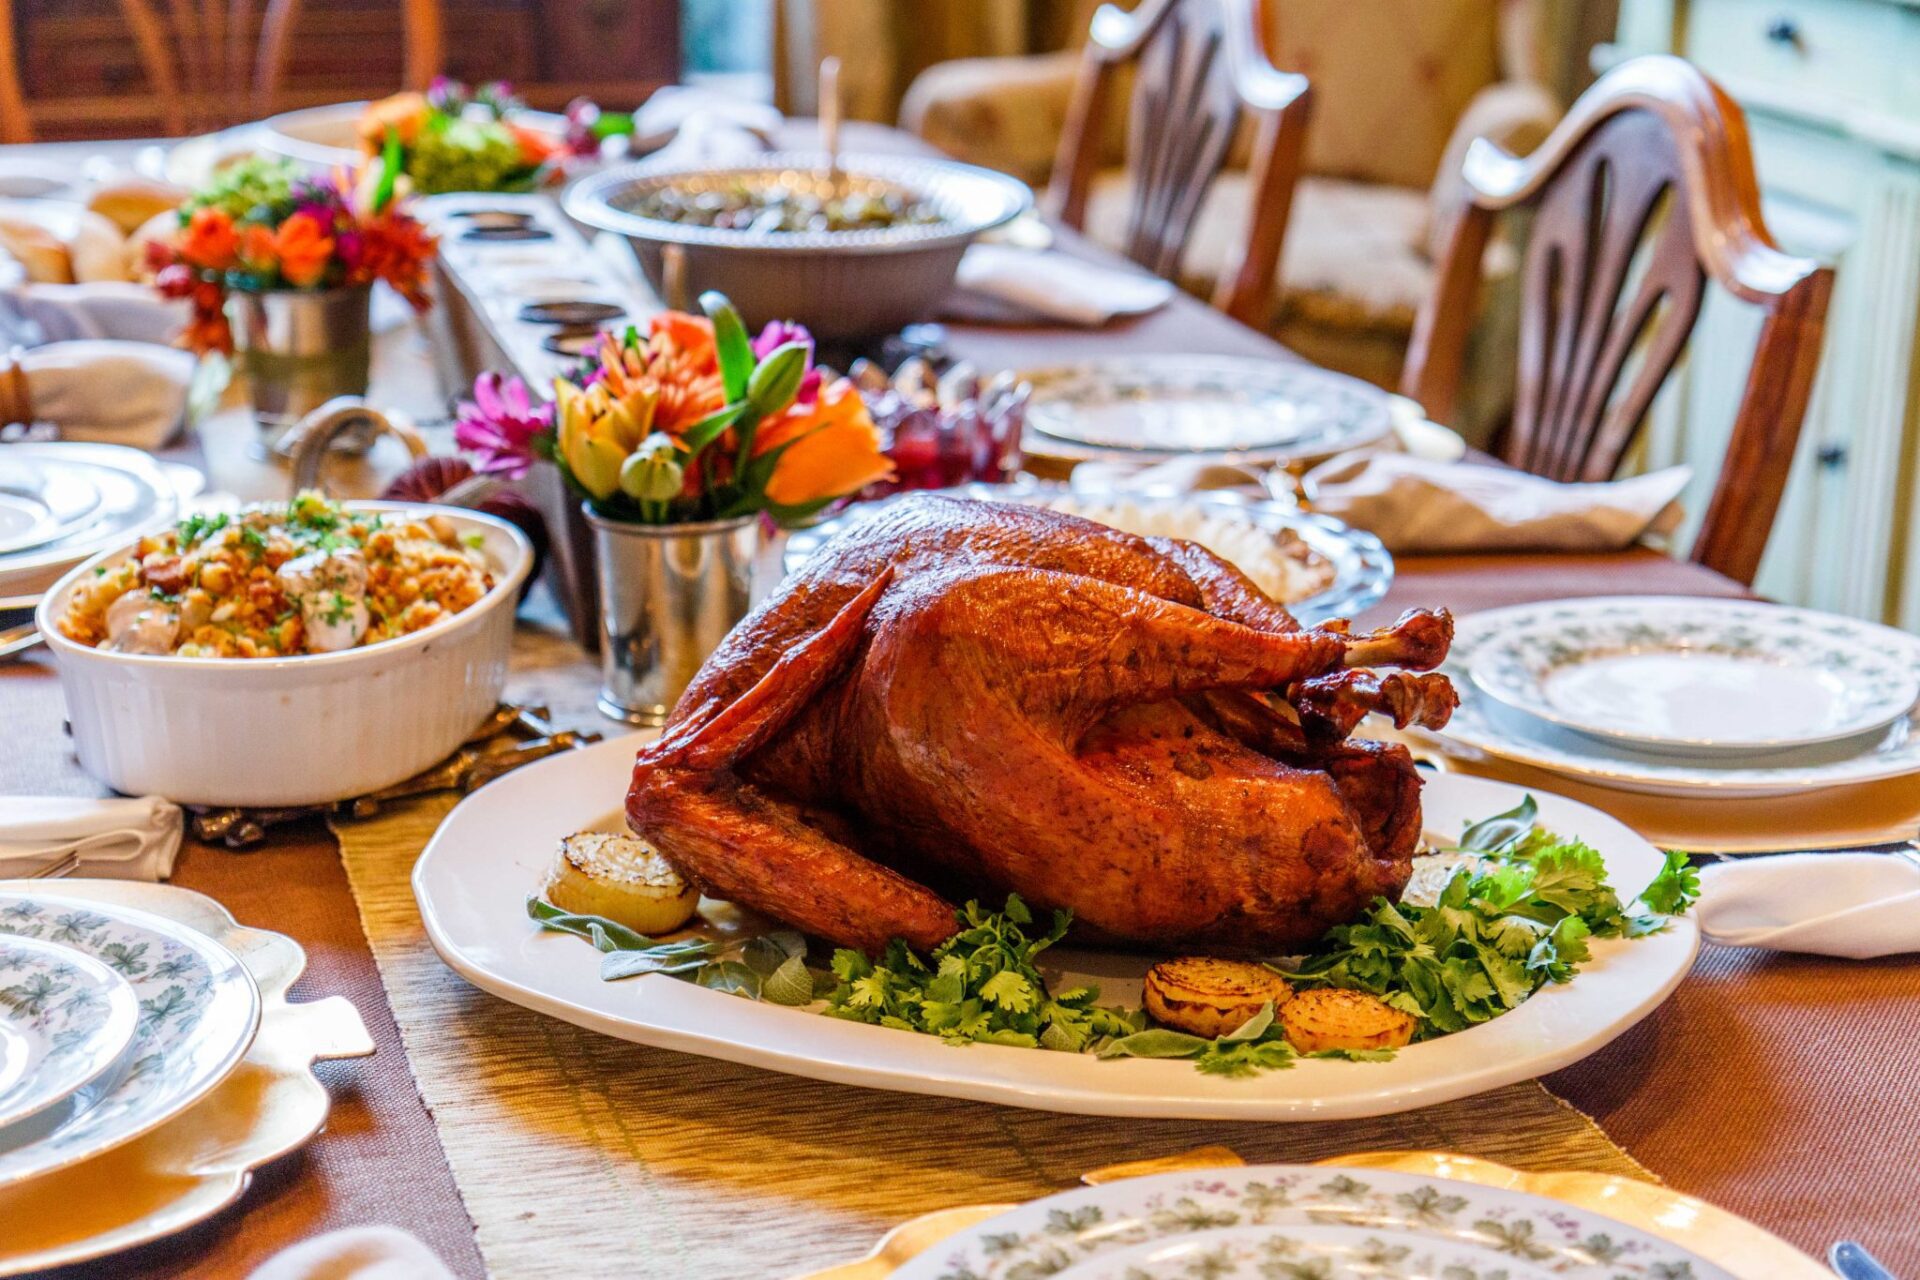 Thanksgiving dinner, have Thanksgiving at Puckett's in downtown Franklin, TN, or pick up to go, they will be open Thanksgiving Day from 11 a.m. till 4 p.m. for a family-style meal, or order Puckett’s home cooking to go for an easy meal prep this year